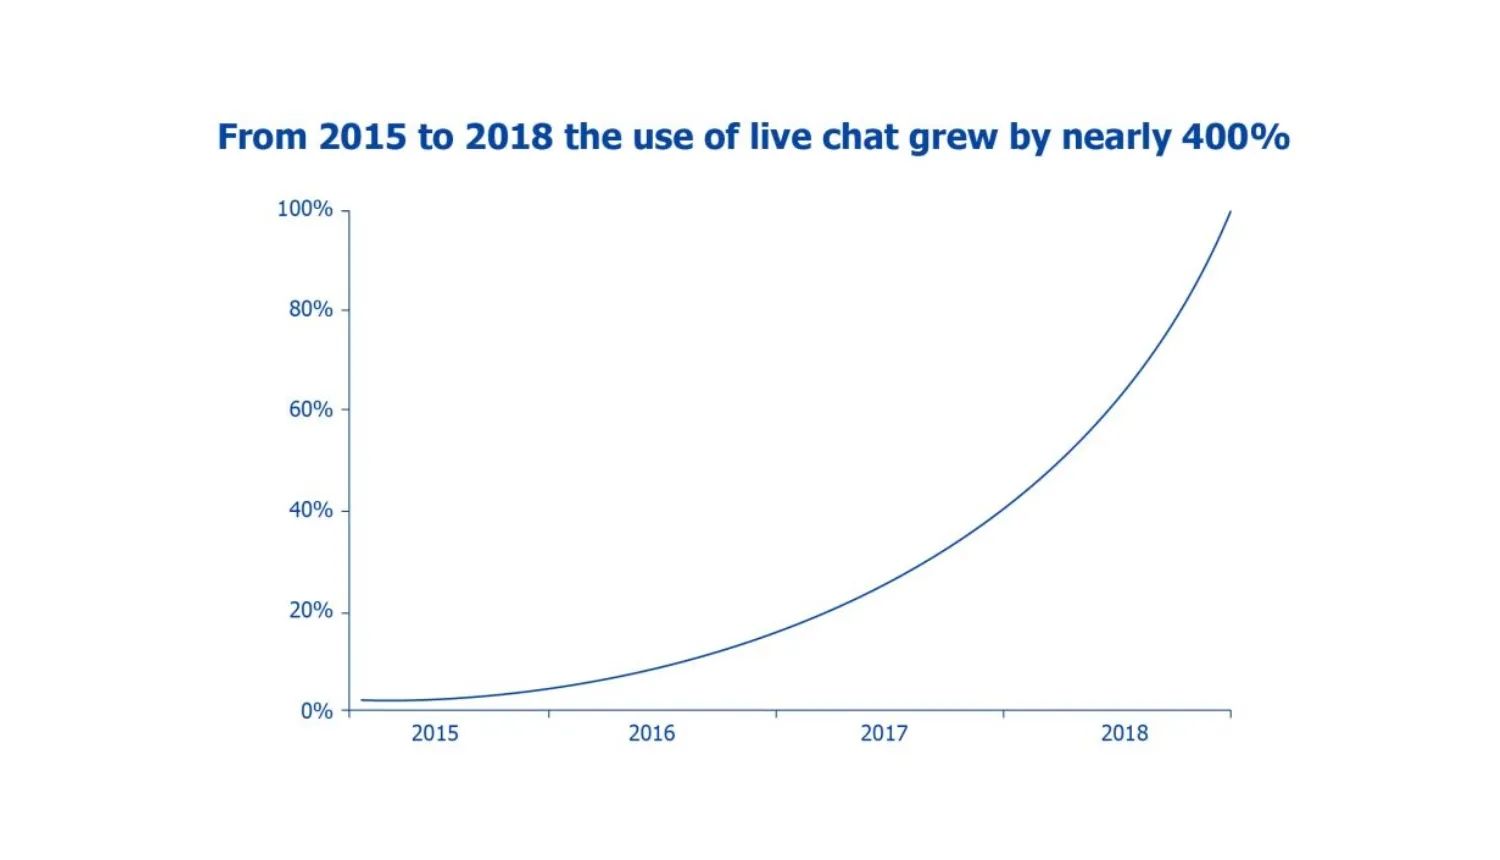 Graph showing that from 2015 to 2018 the use of live chat grew by almost 400%